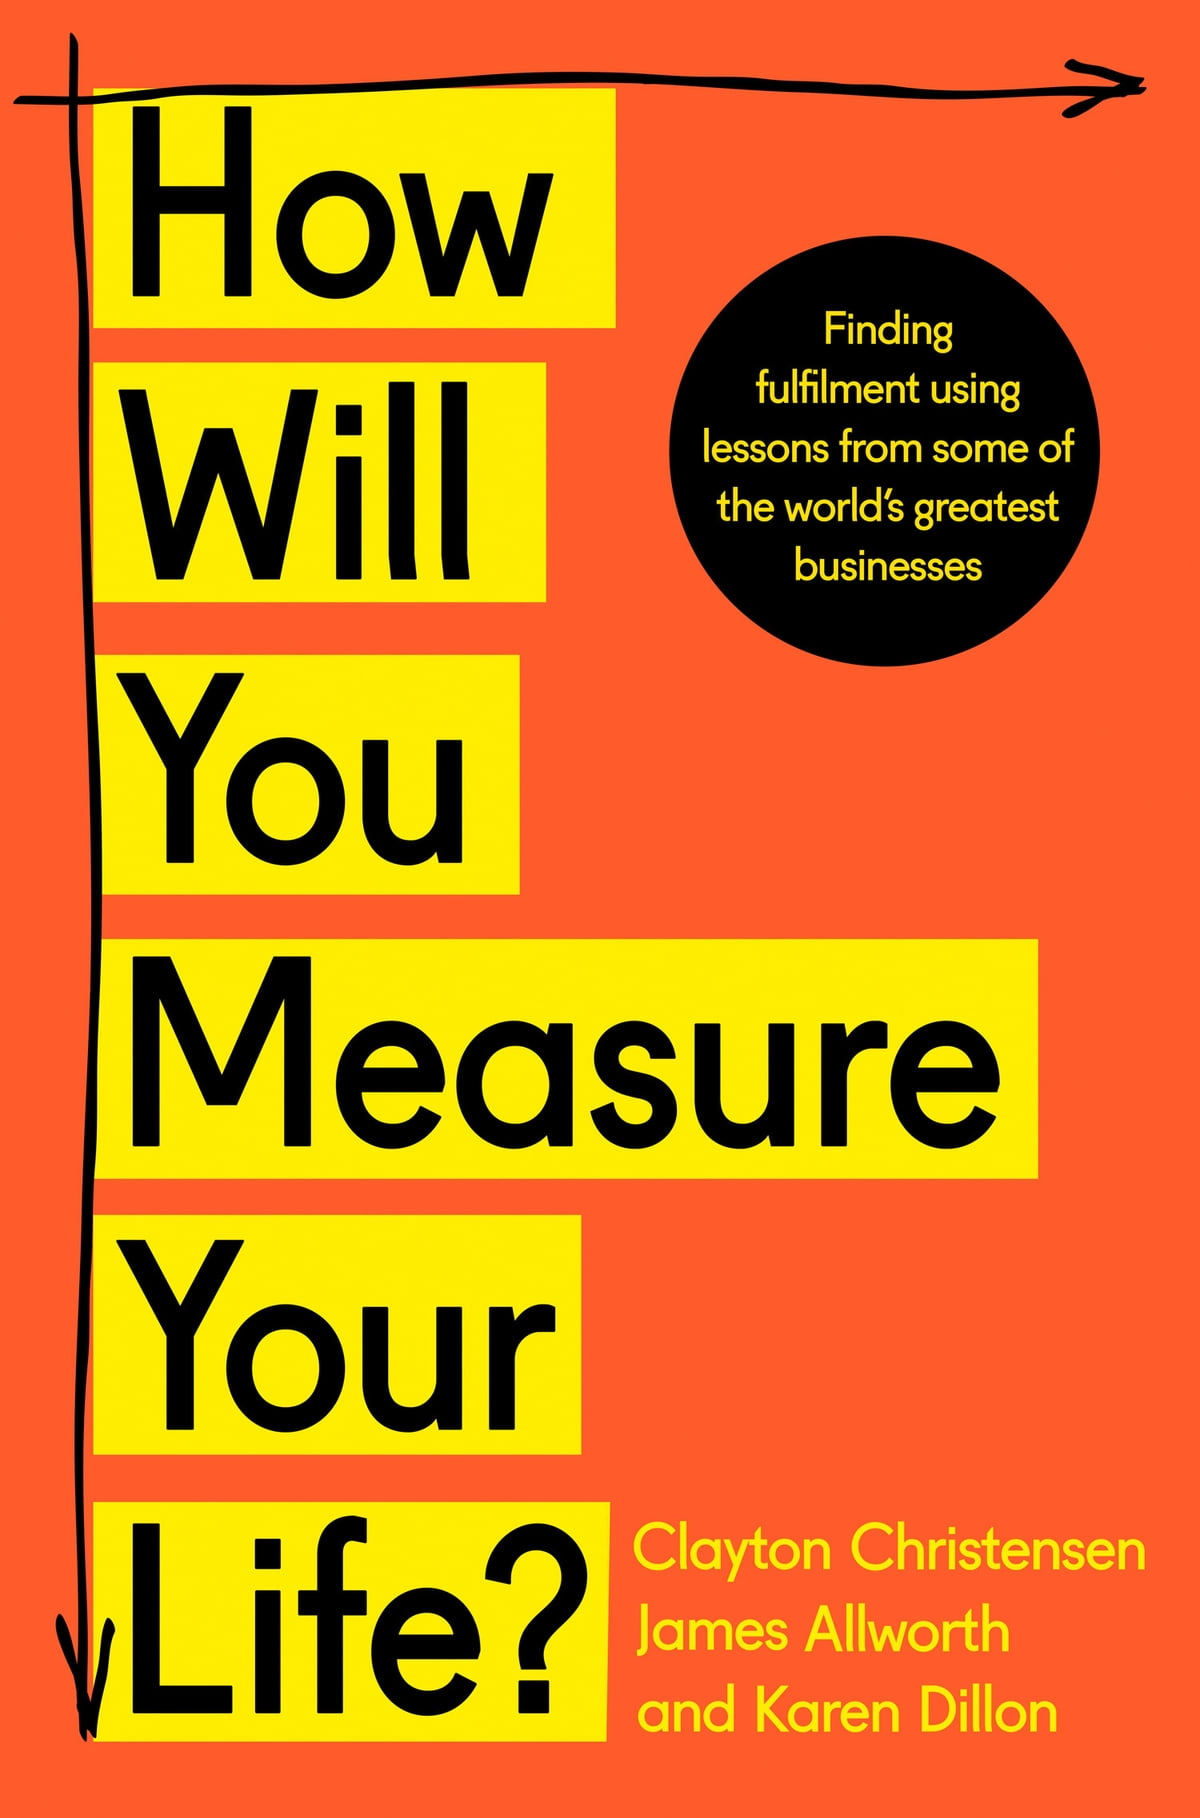 How will you measure your life review